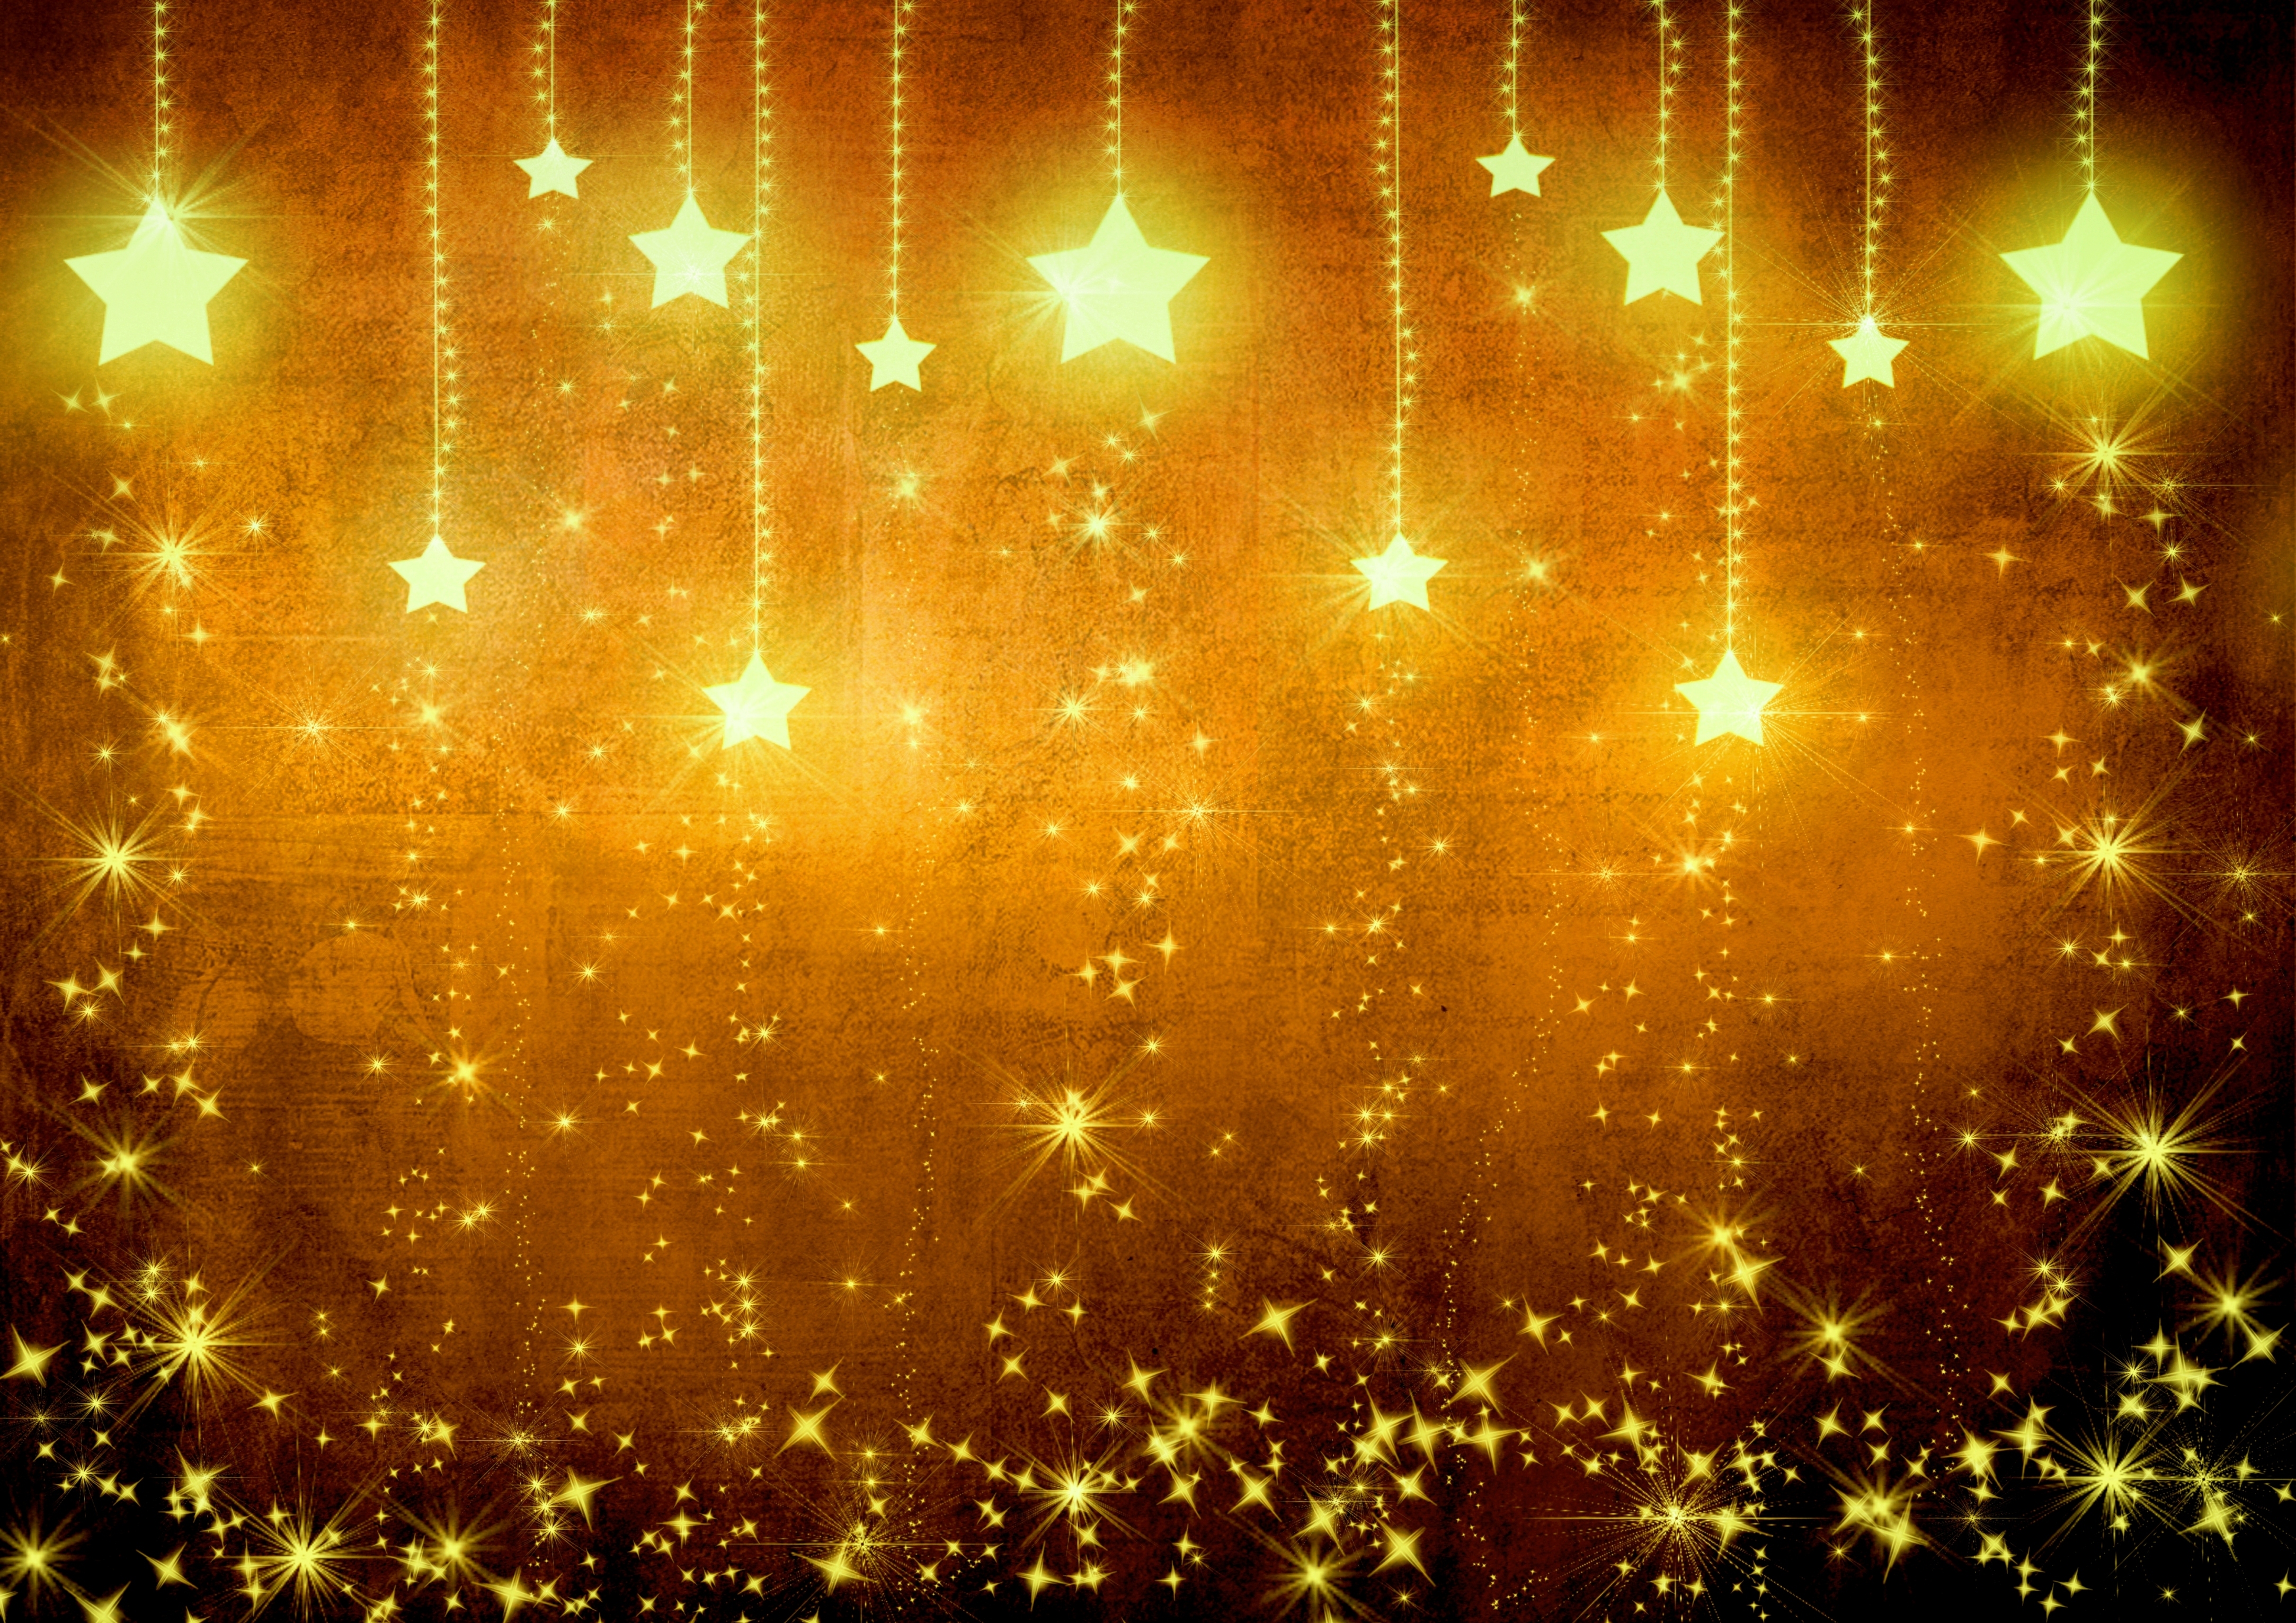 Star gold holiday background brown yellow light texture